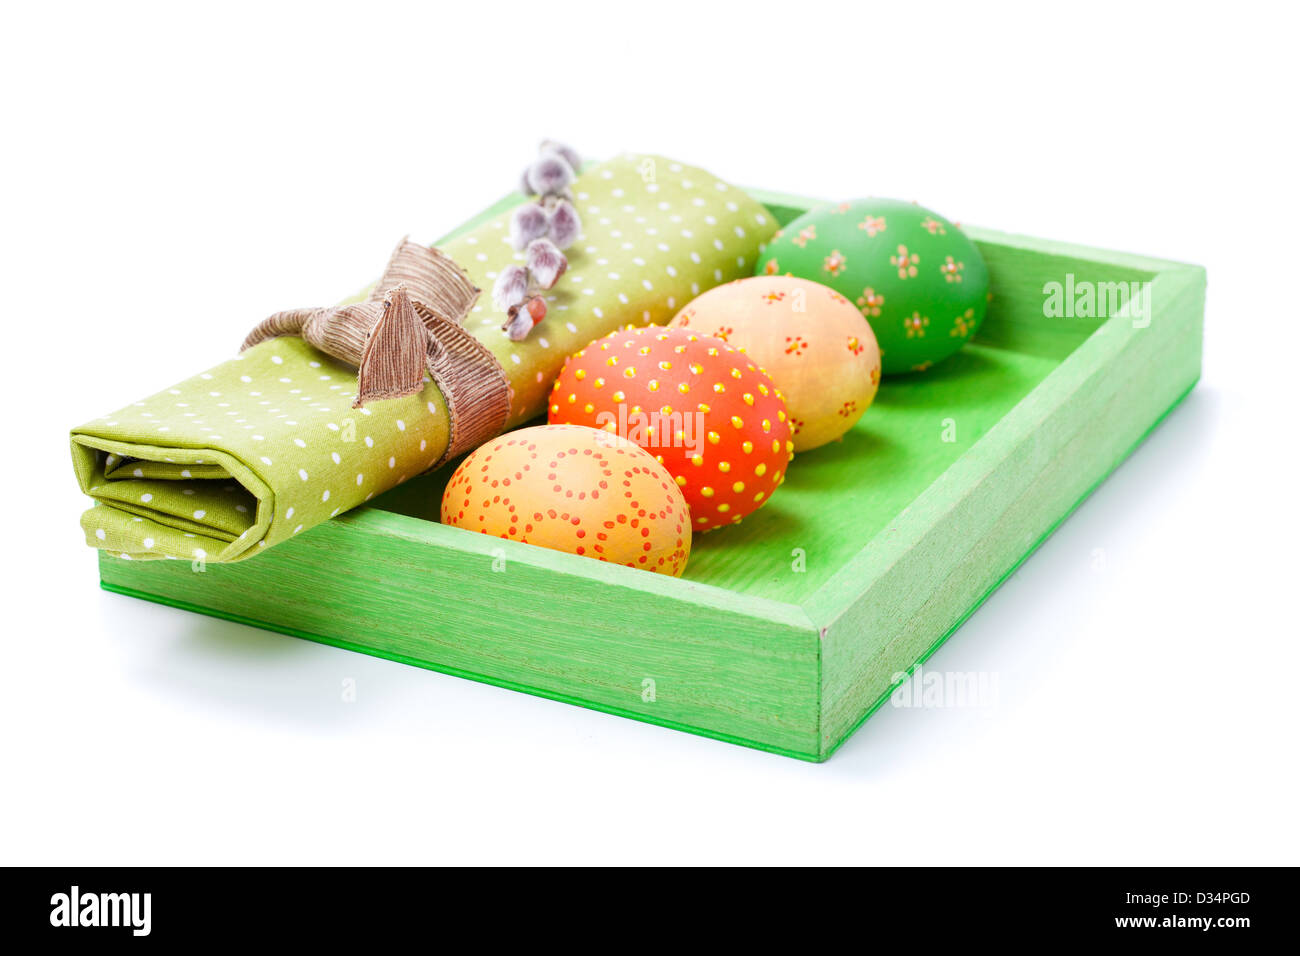 Easter egg with a serviette, in a tray for breakfast. isolated on white background. Stock Photo